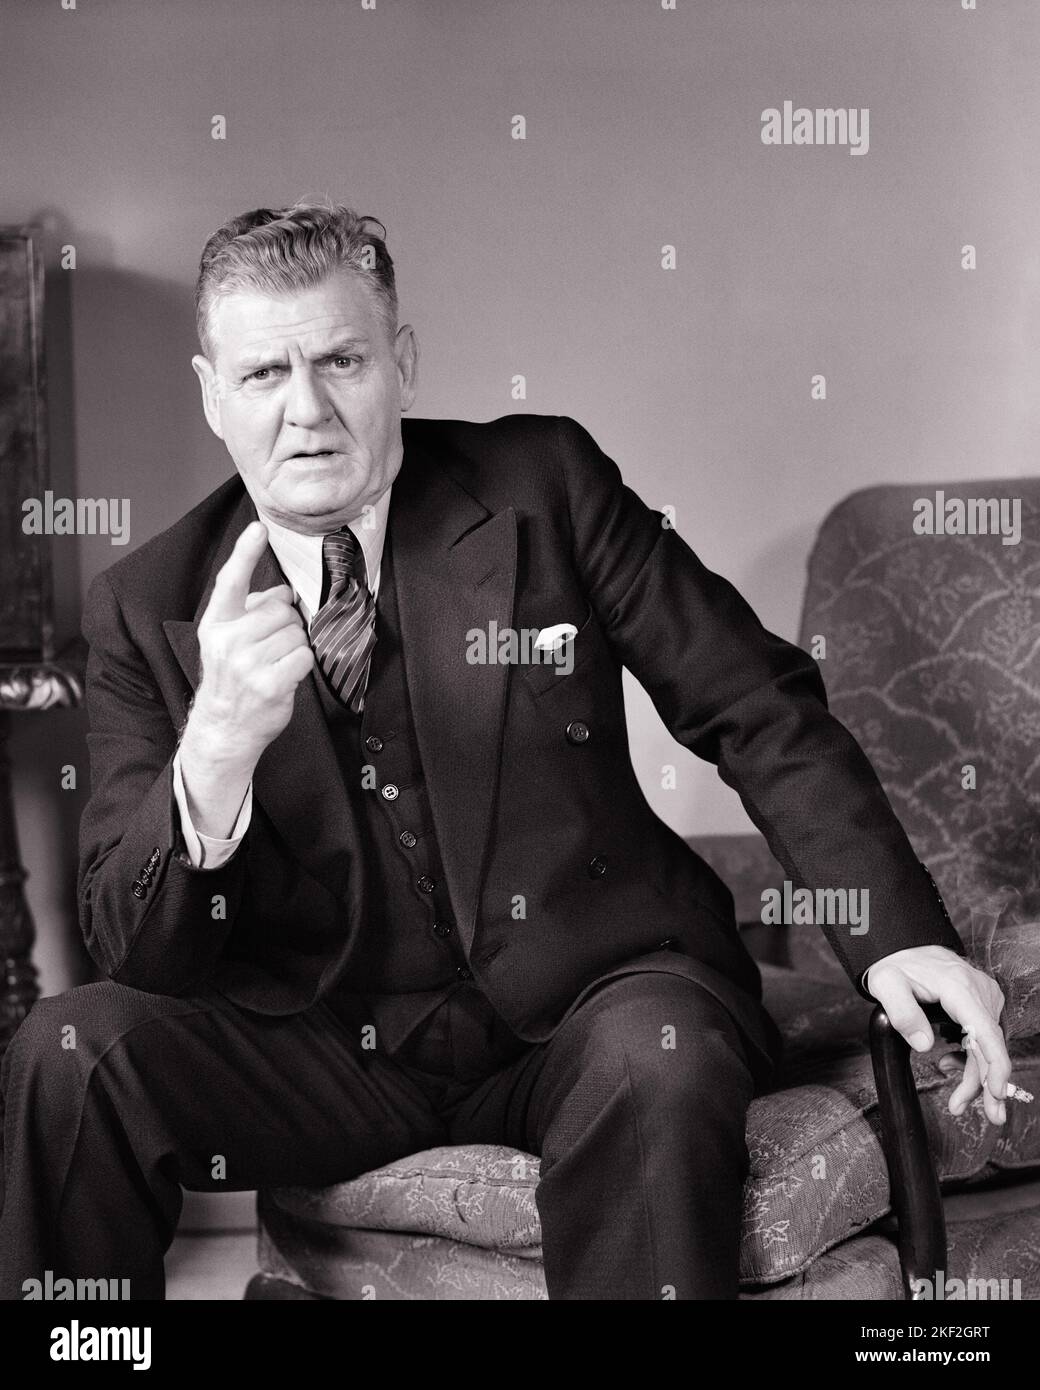 1940s ANGRY MAN POINTING INDEX FINGER SMOKING A CIGARETTE WEARING A FASHIONABLE THREE PIECE SUIT LOOKING STERNLY AT THE CAMERA - s6013 HAR001 HARS ANNOYED STUDIO SHOT HOME LIFE LUXURY MANAGER COPY SPACE HALF-LENGTH PERSONS MALES EXECUTIVES GESTURING VEST BANKER MIDDLE-AGED B&W MIDDLE-AGED MAN EYE CONTACT CIGARETTES INDEX SUIT AND TIE DISTRESSED TOBACCO IRATE EXCITEMENT LEADERSHIP POLITICIAN POWERFUL PRIDE AUTHORITY BAD HABIT GESTURES OCCUPATIONS POLITICS SMOKER NICOTINE BOSSES THREE PIECE SUIT ADDICTIVE STYLISH DISPLEASURE HOSTILITY ANNOYANCE EMOTION EMOTIONAL IRRITATED MANAGERS Stock Photo